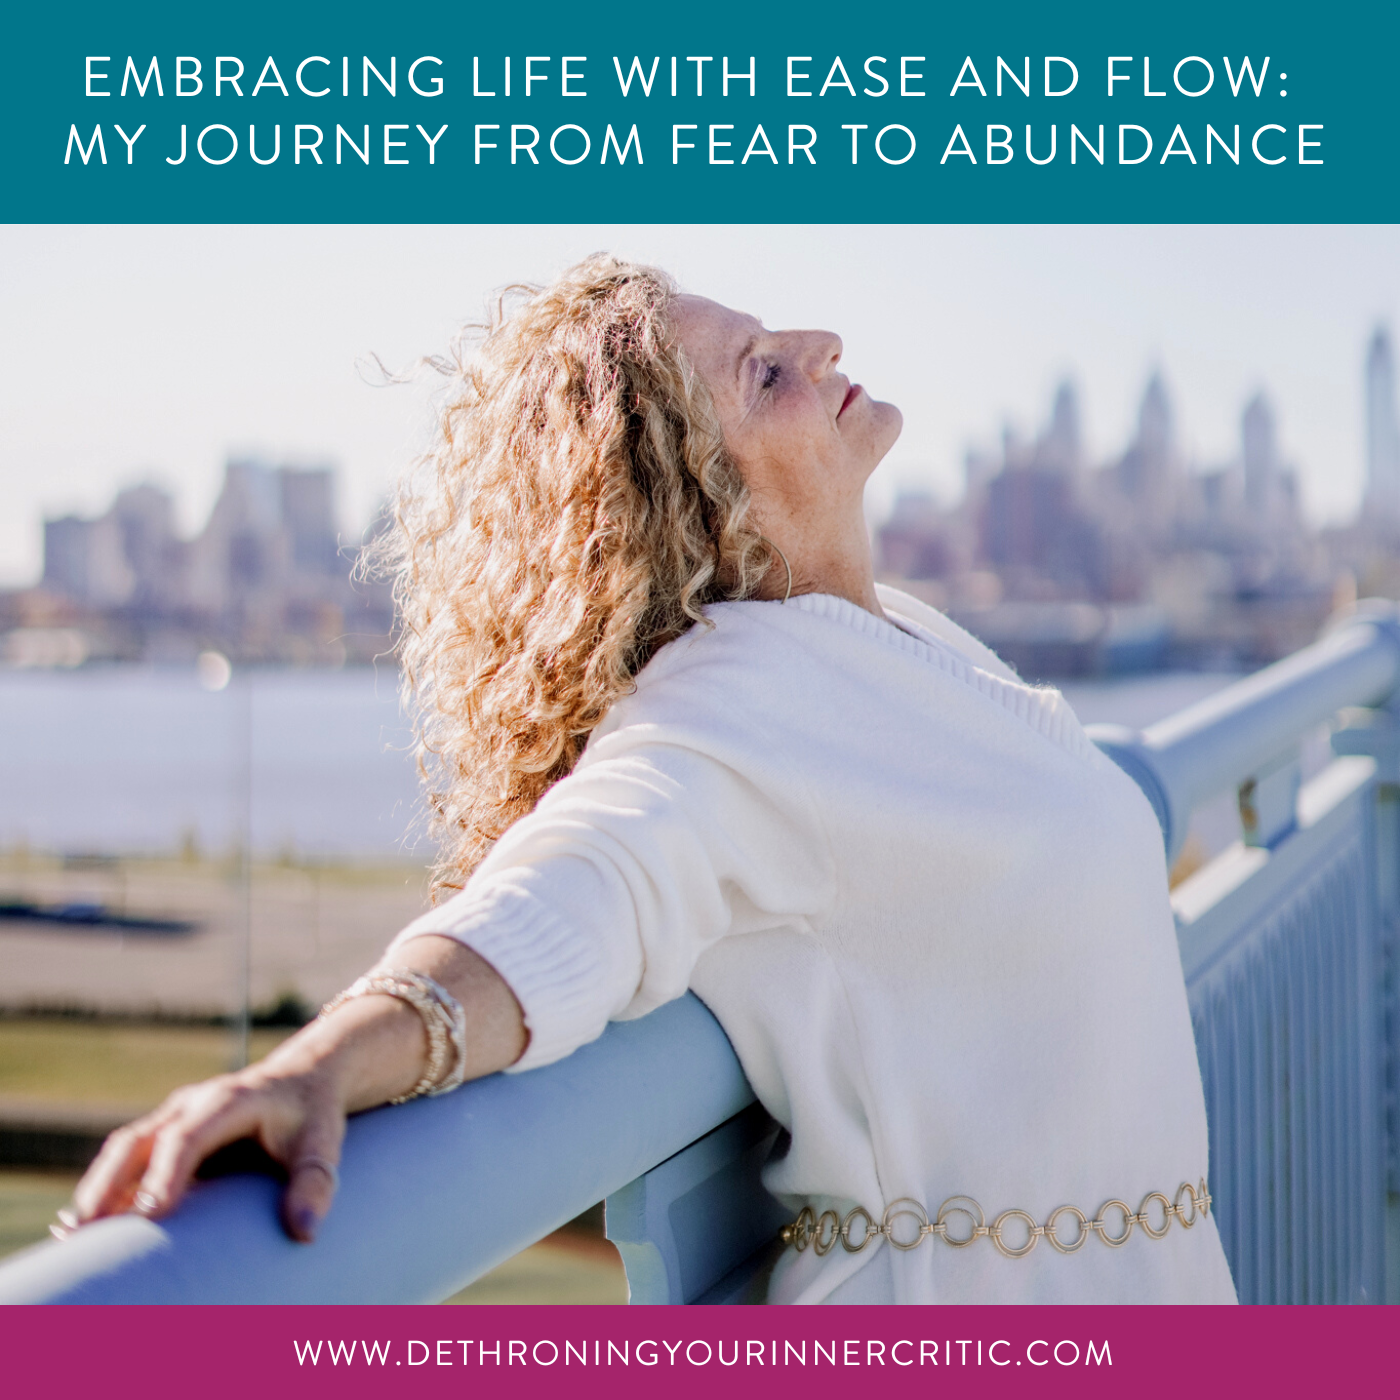 Embracing Life with Ease and Flow: My Journey from Fear to Abundance